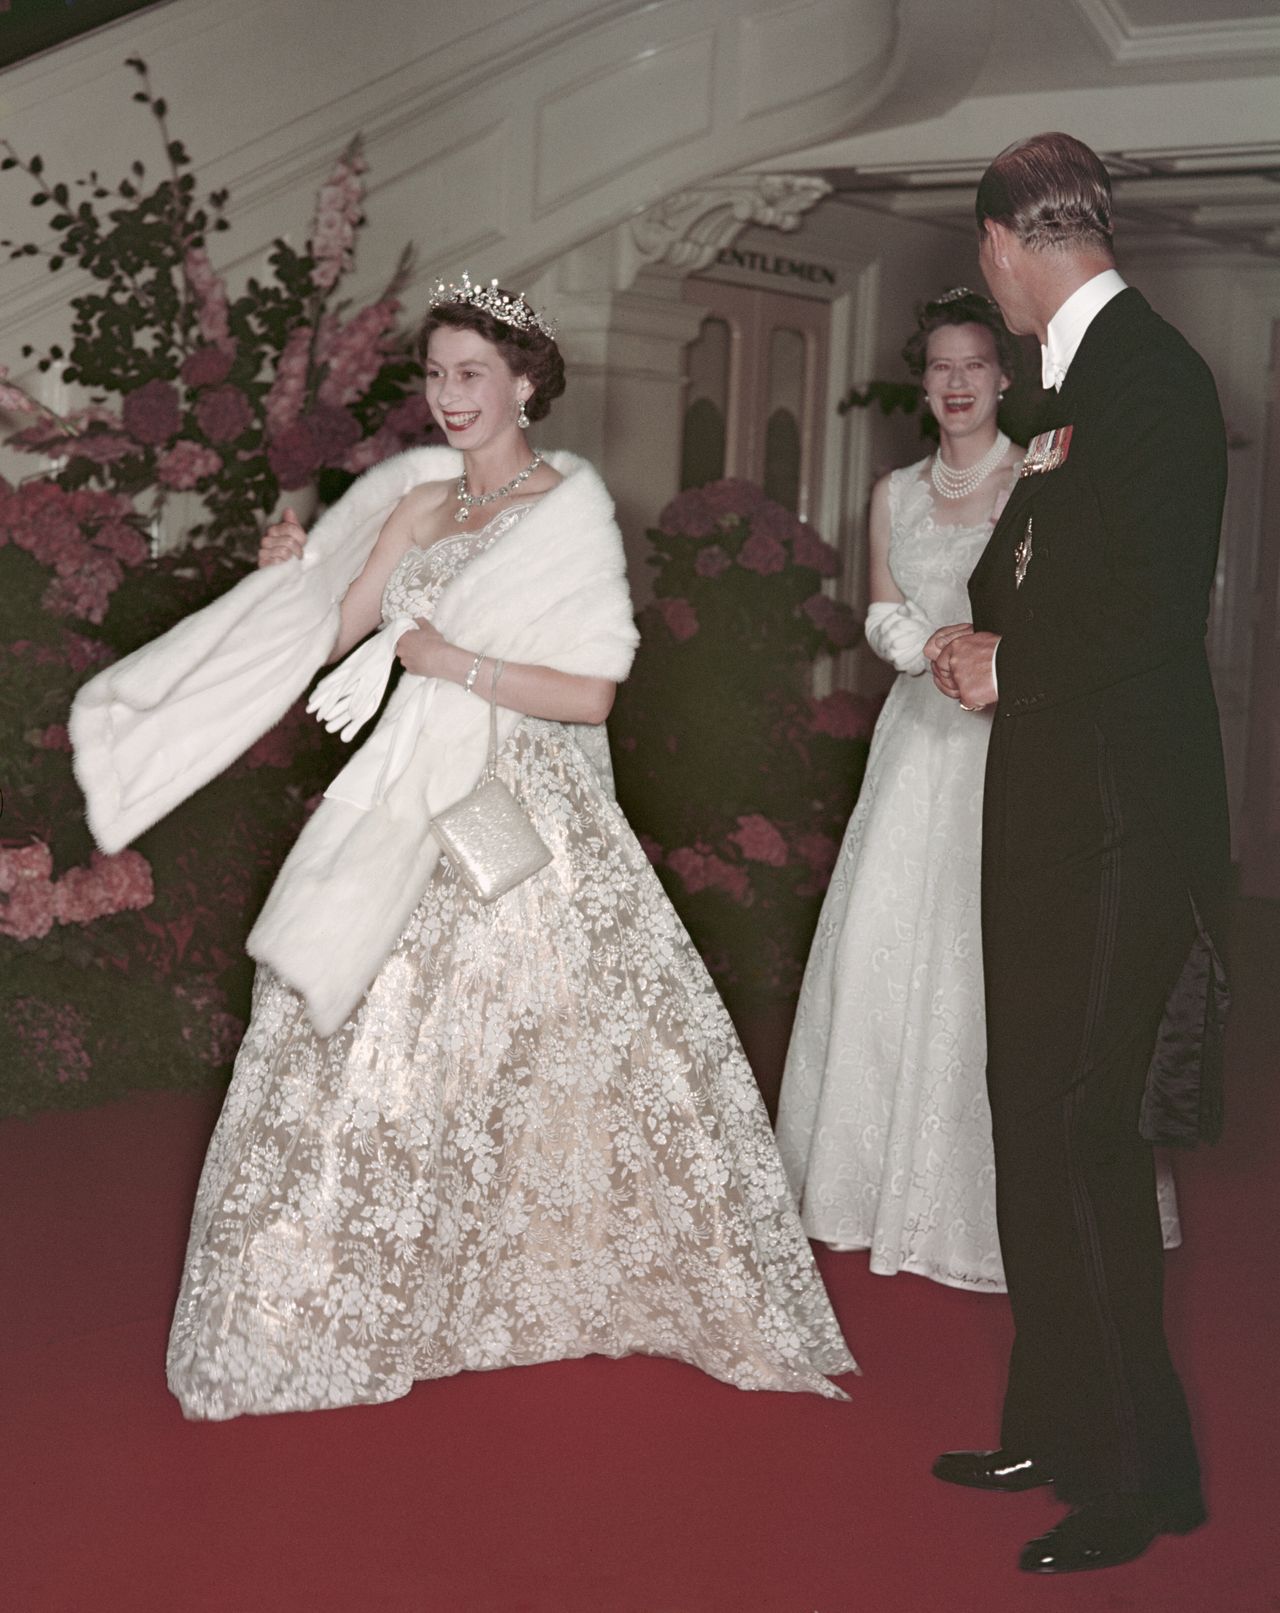 Queen Elizabeth II and Prince Philip leave a banquet during their Commonwealth visit to Australia in 1954.